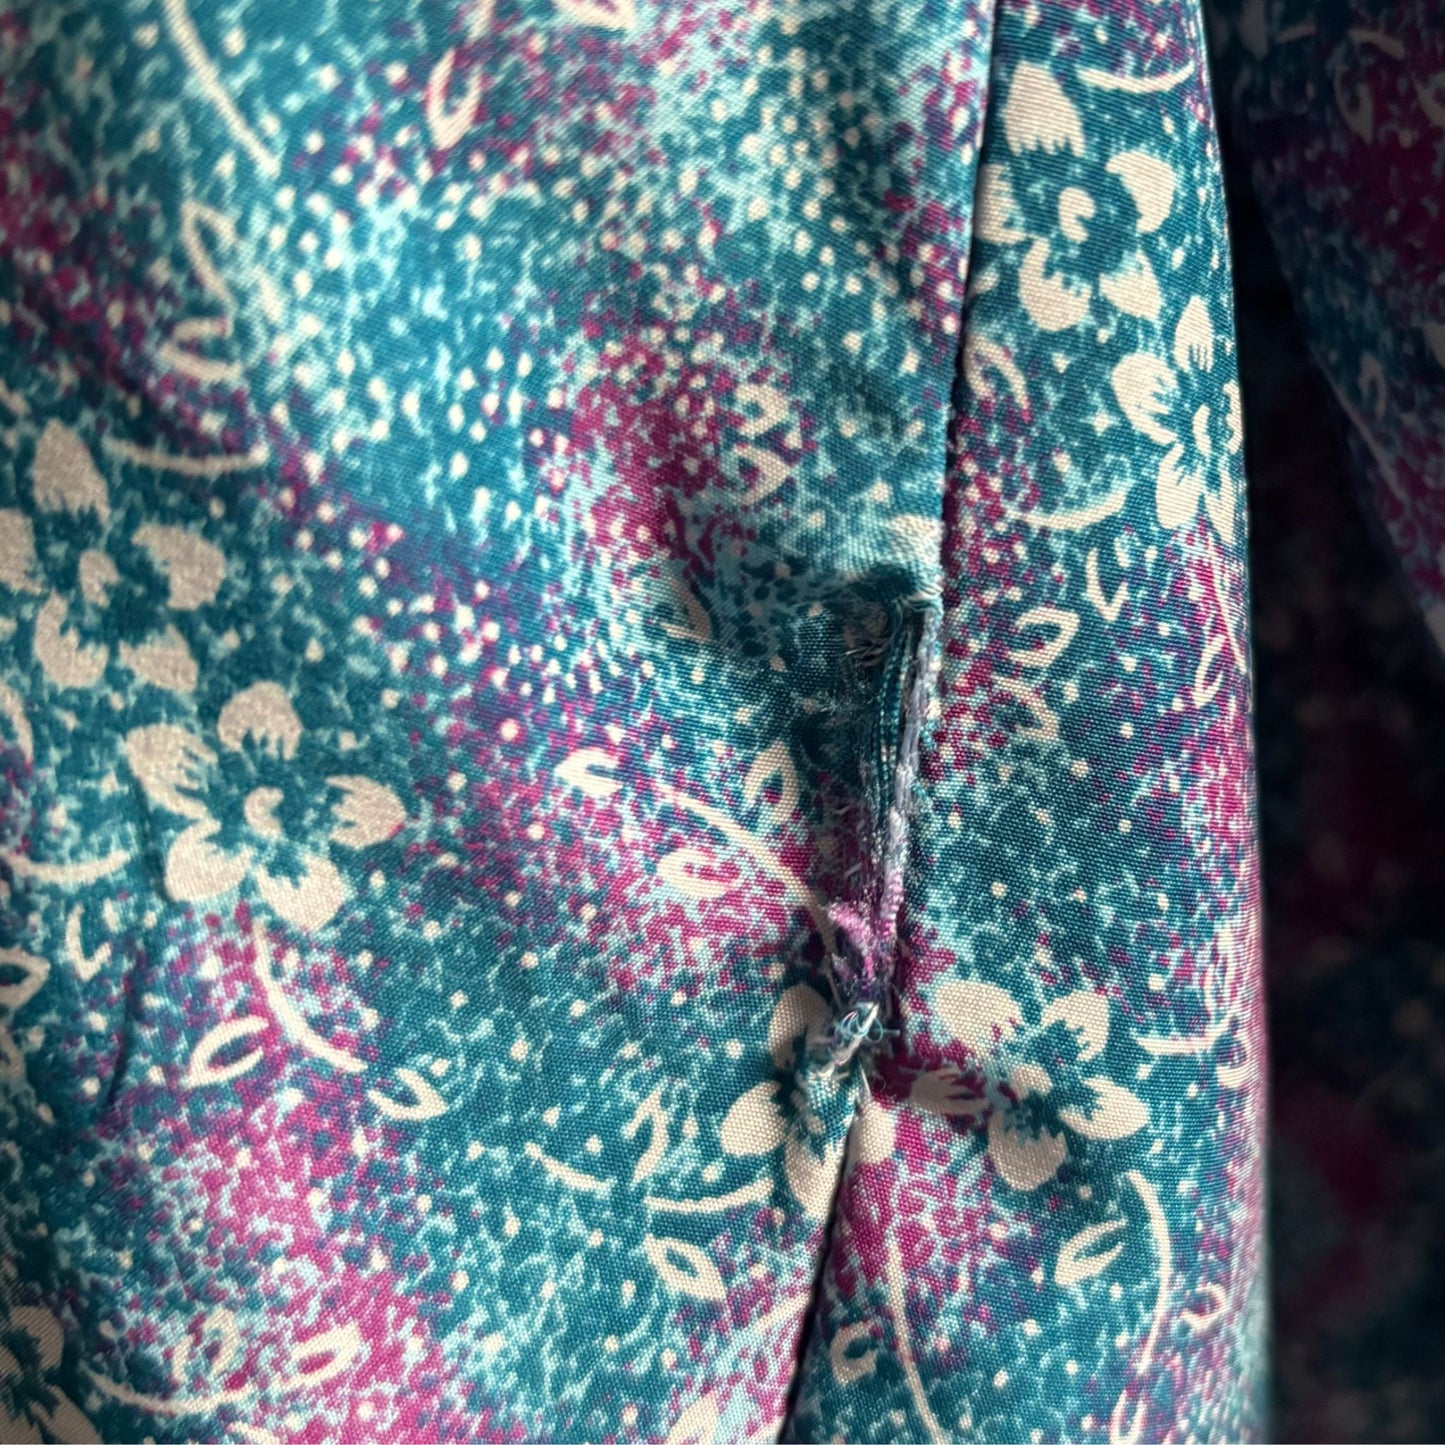 Teal, purple and white floral vintage secretary blouse with pussy bow collar. Approx UK size 18-22